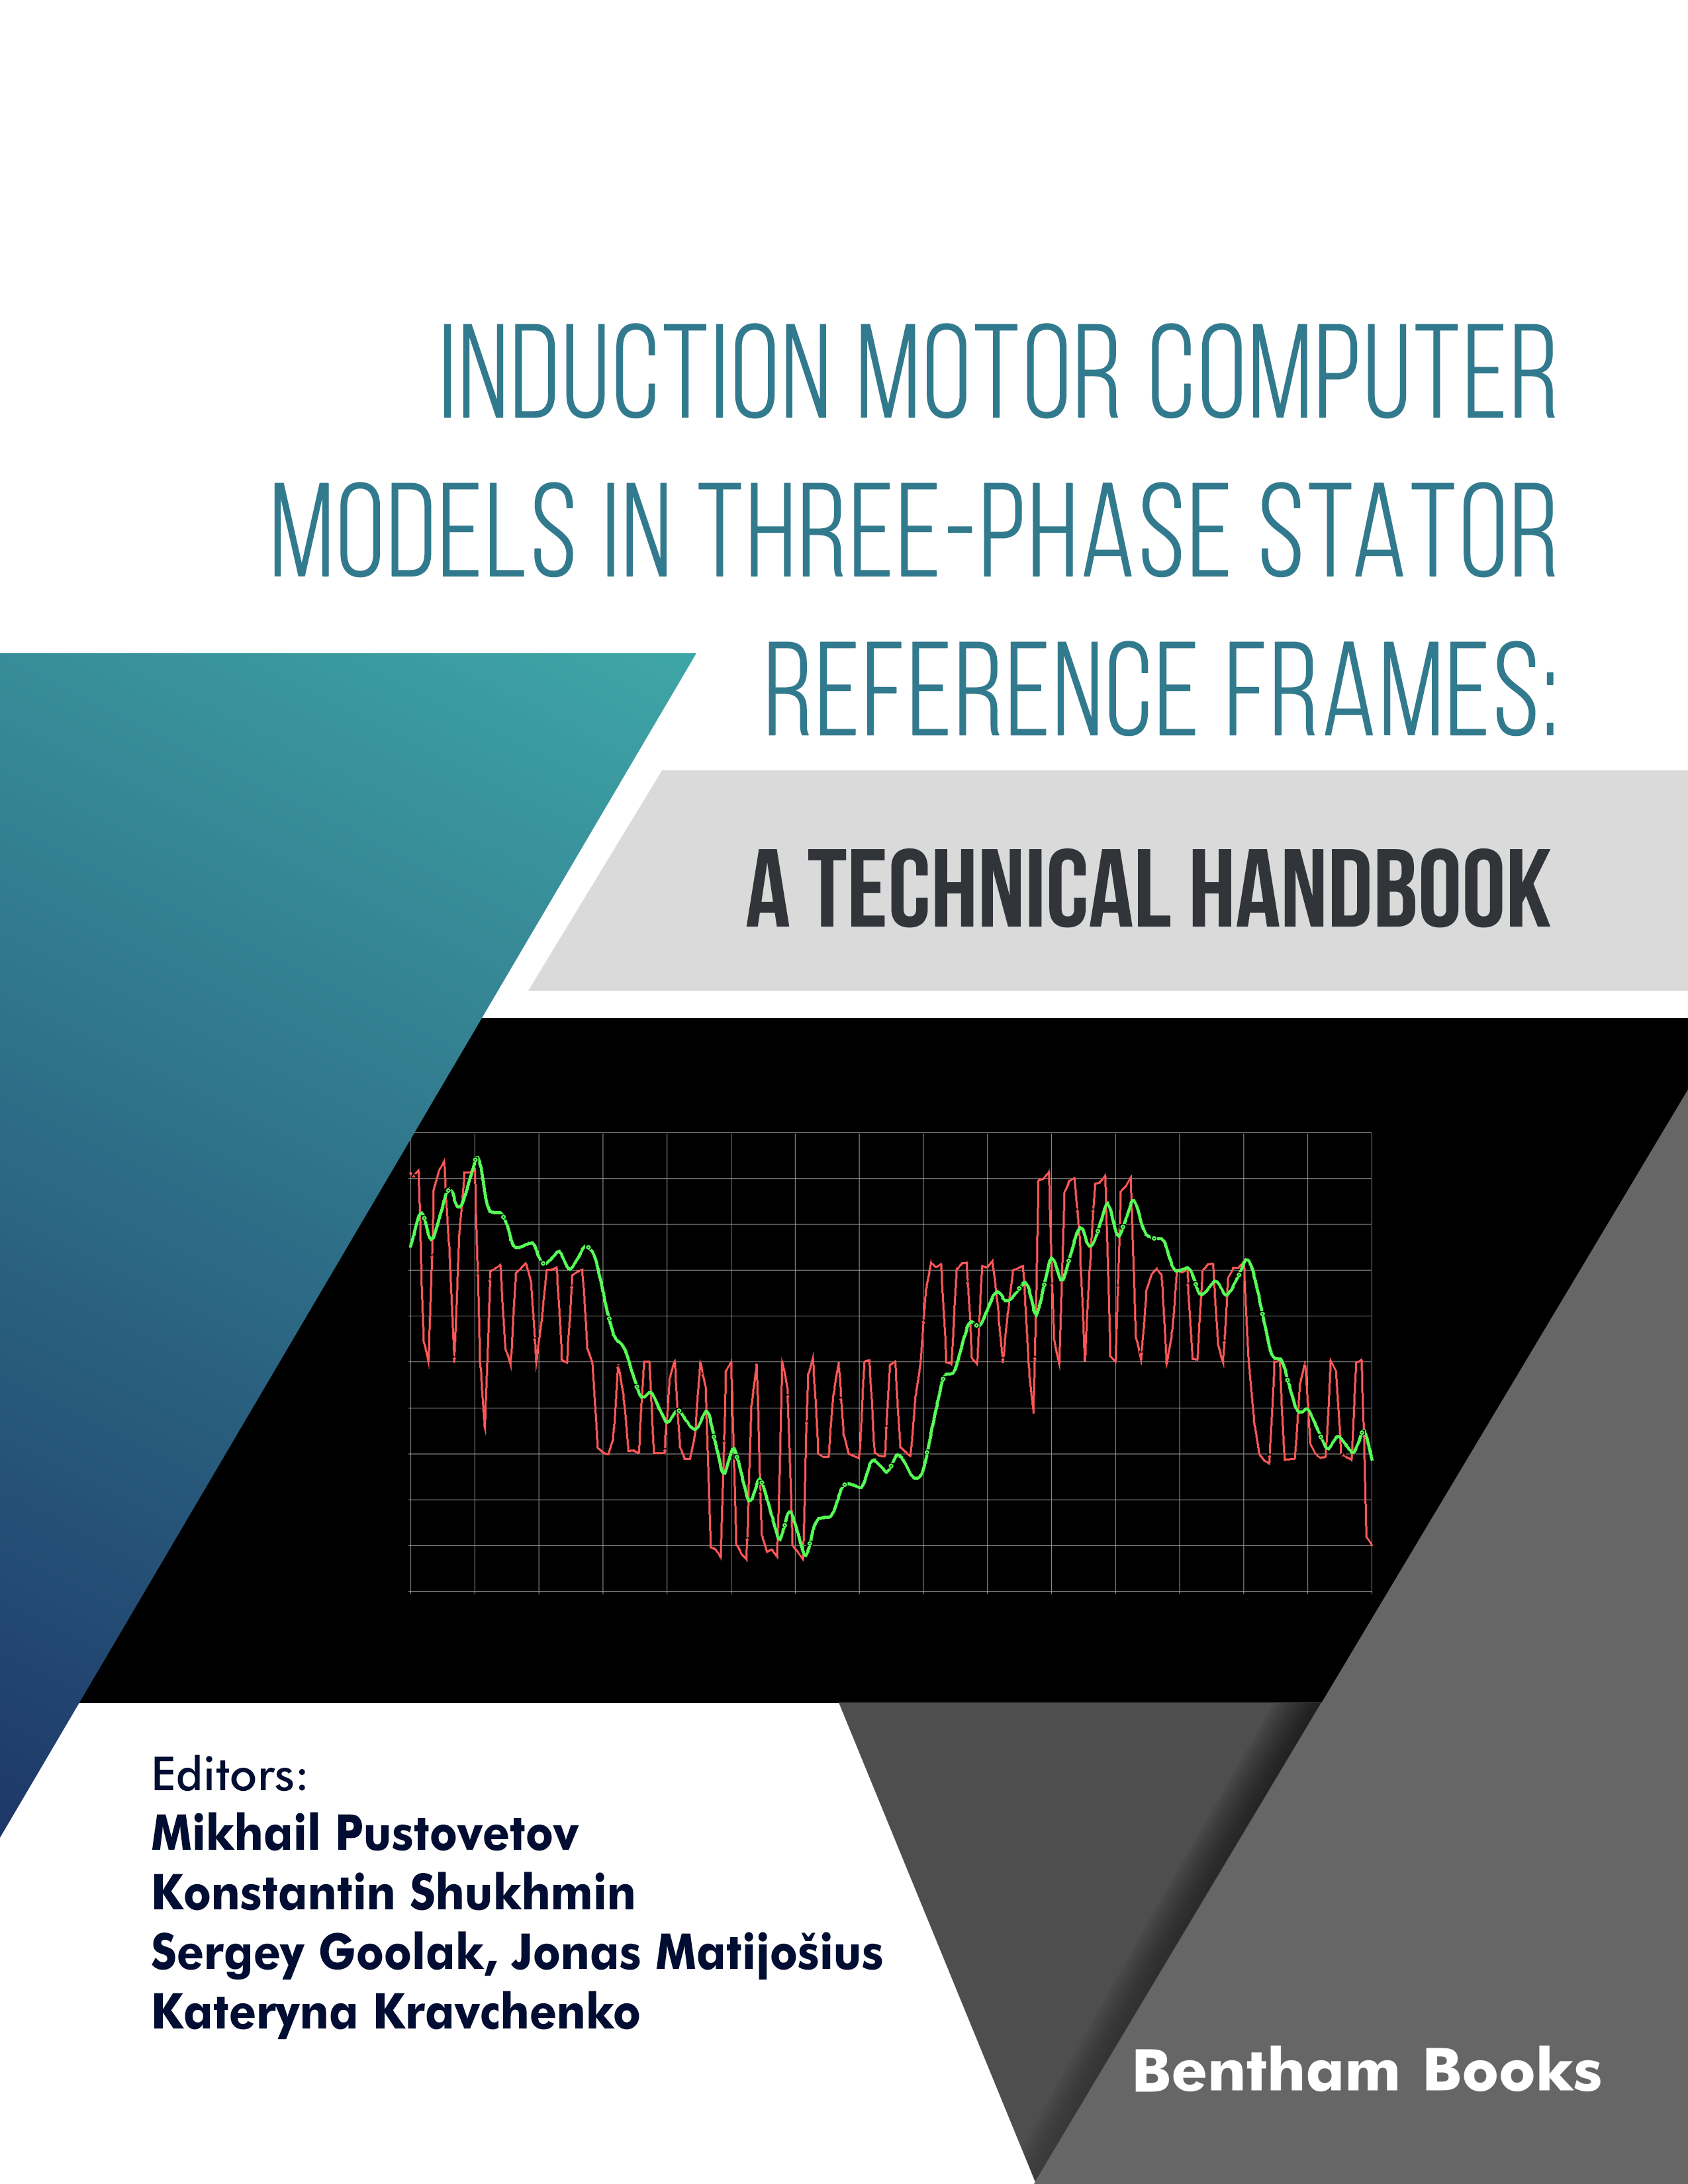 Induction Motor Computer Models in Three-Phase Stator Reference Frames: A Technical Handbook